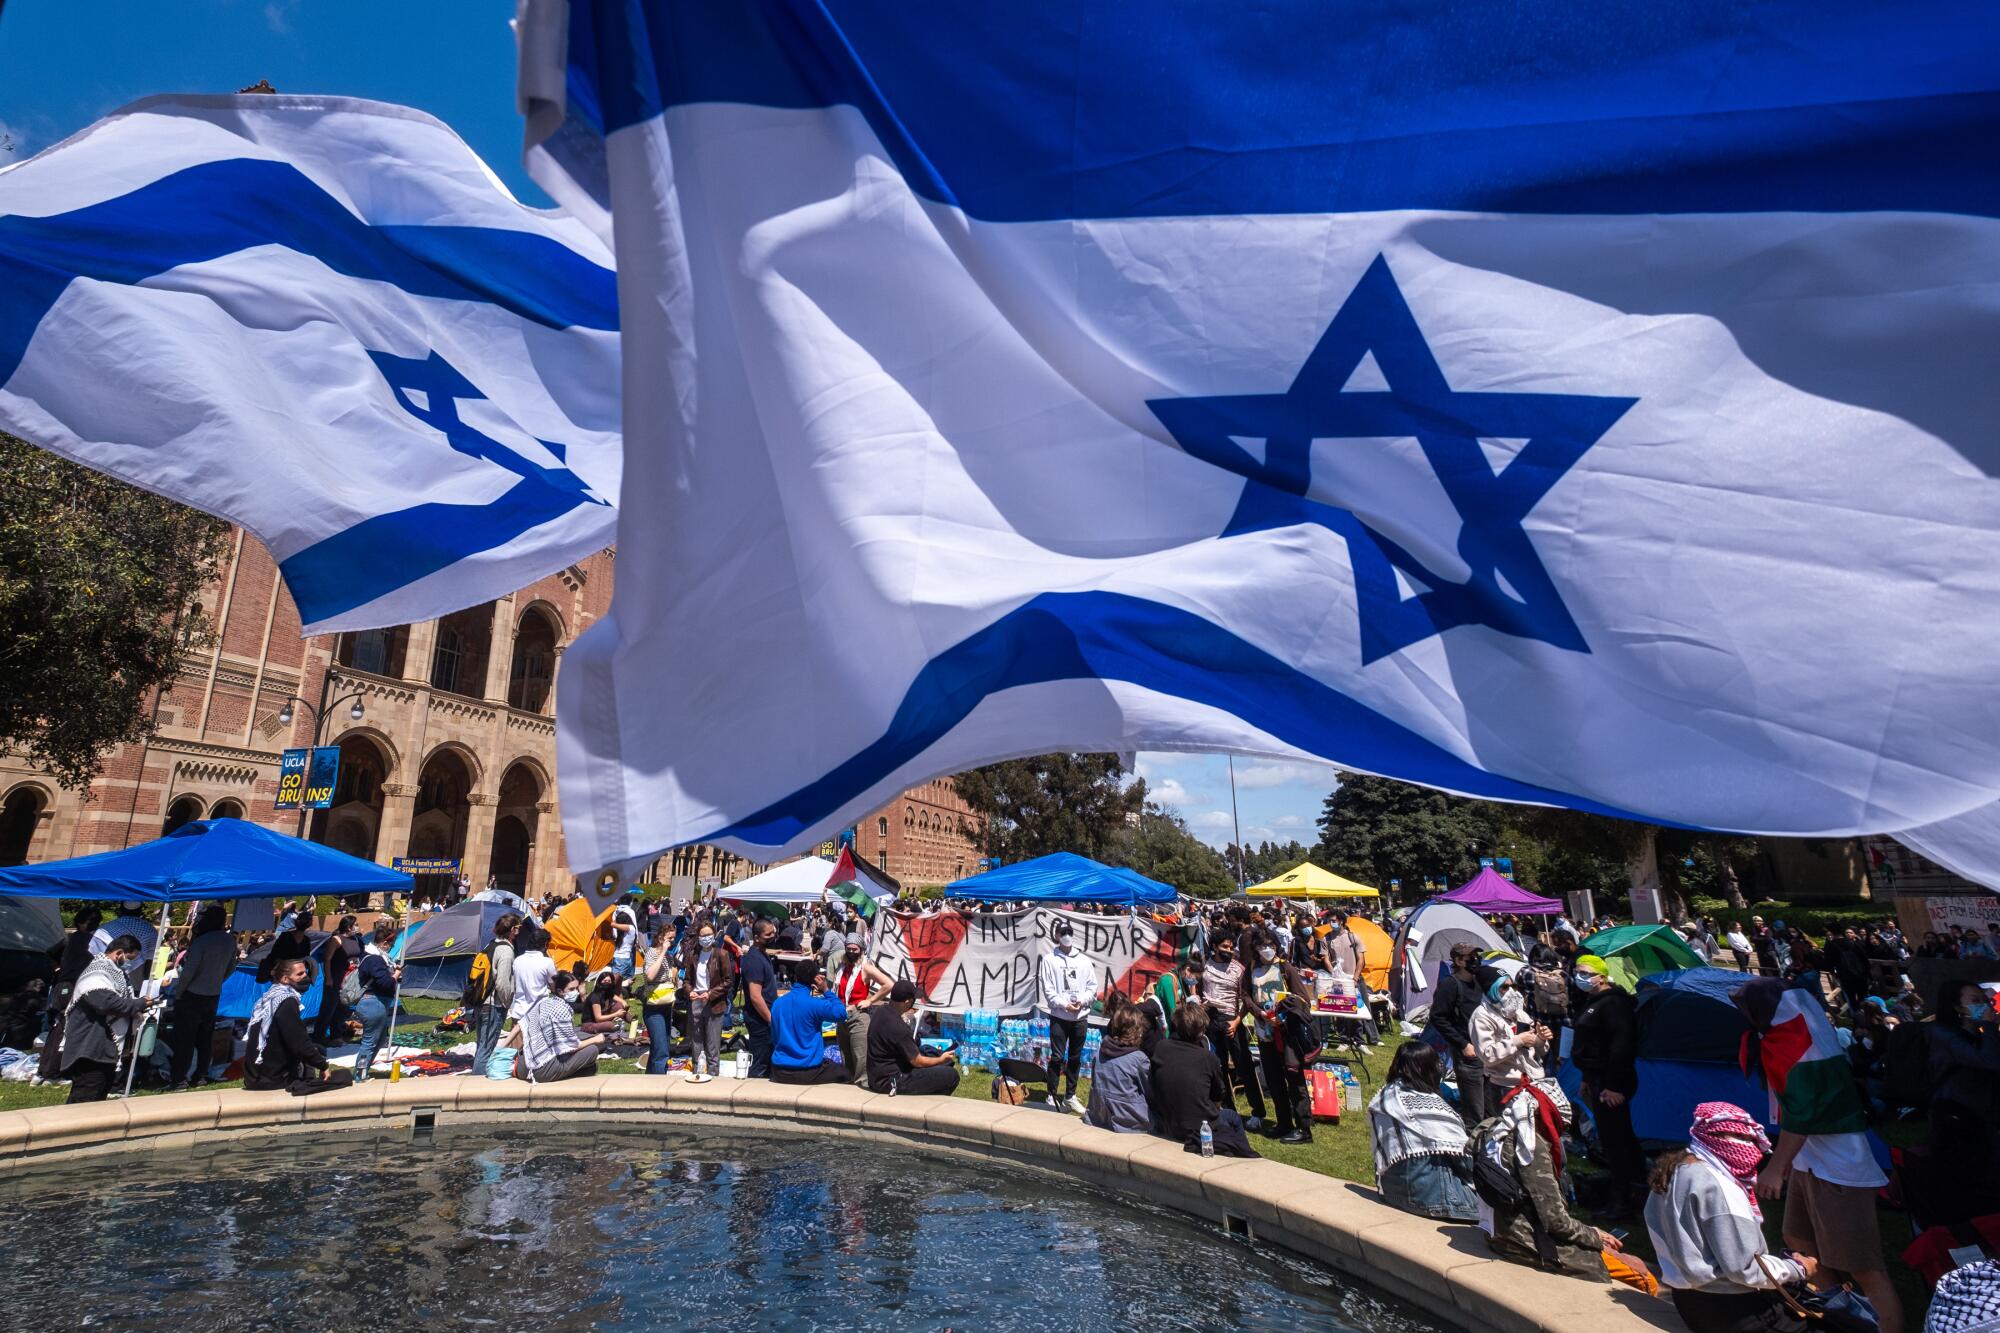 Pro-Israeli supporters wave their flags near an encampment set up by pro-Palestine protesters on the campus of UCLA.